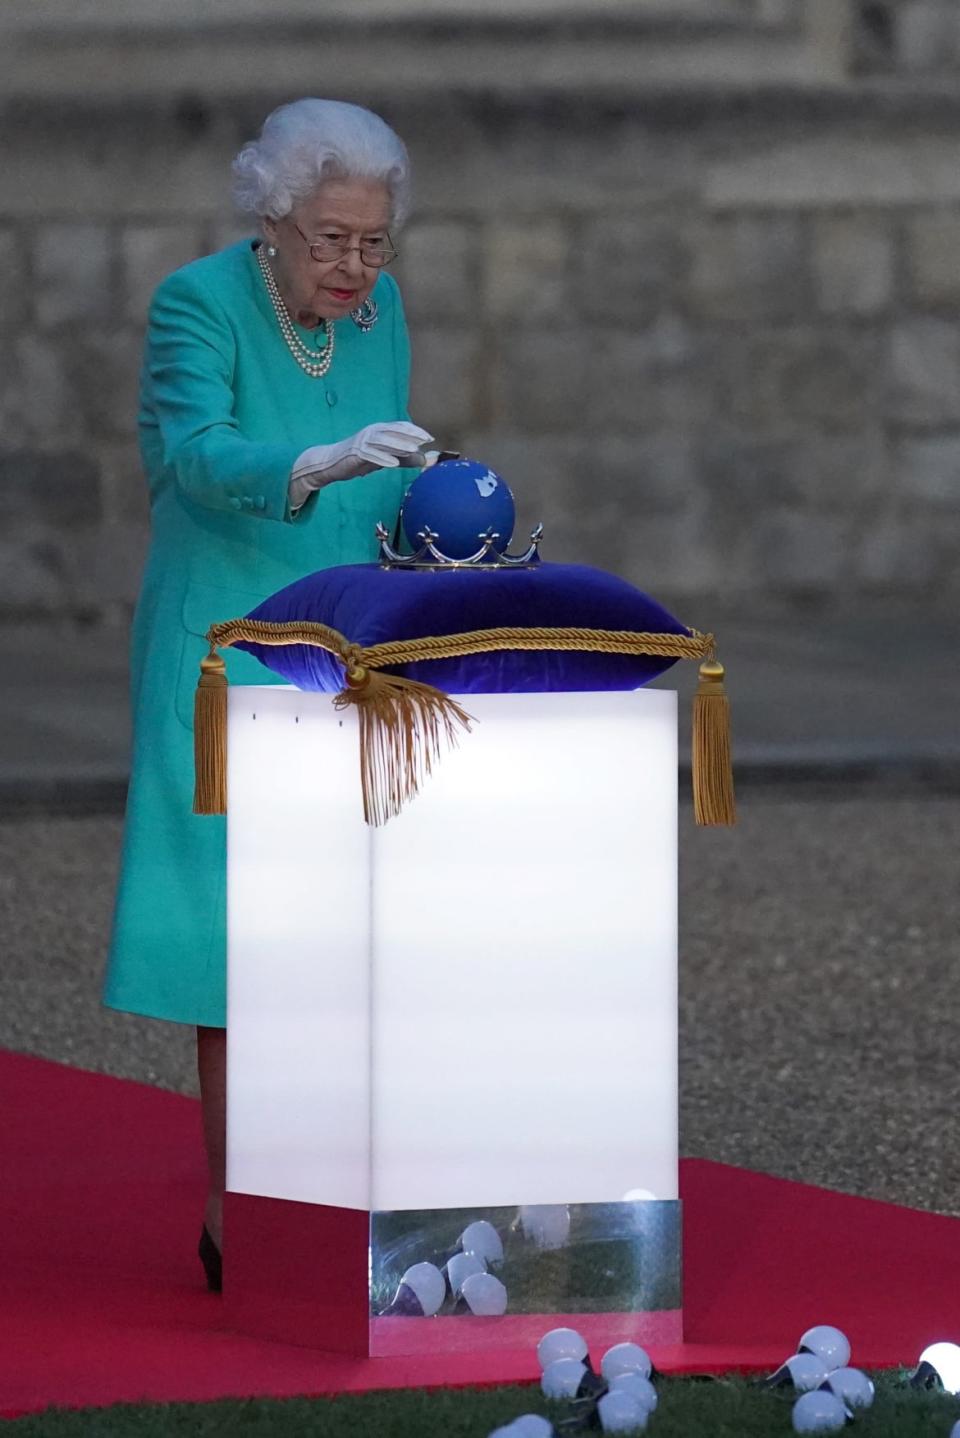 <div class="inline-image__caption"><p>Queen Elizabeth II touches the Commonwealth Nations Globe to start the lighting of the Principal Beacon outside of Buckingham Palace.</p></div> <div class="inline-image__credit">Steve Parsons/Getty</div>